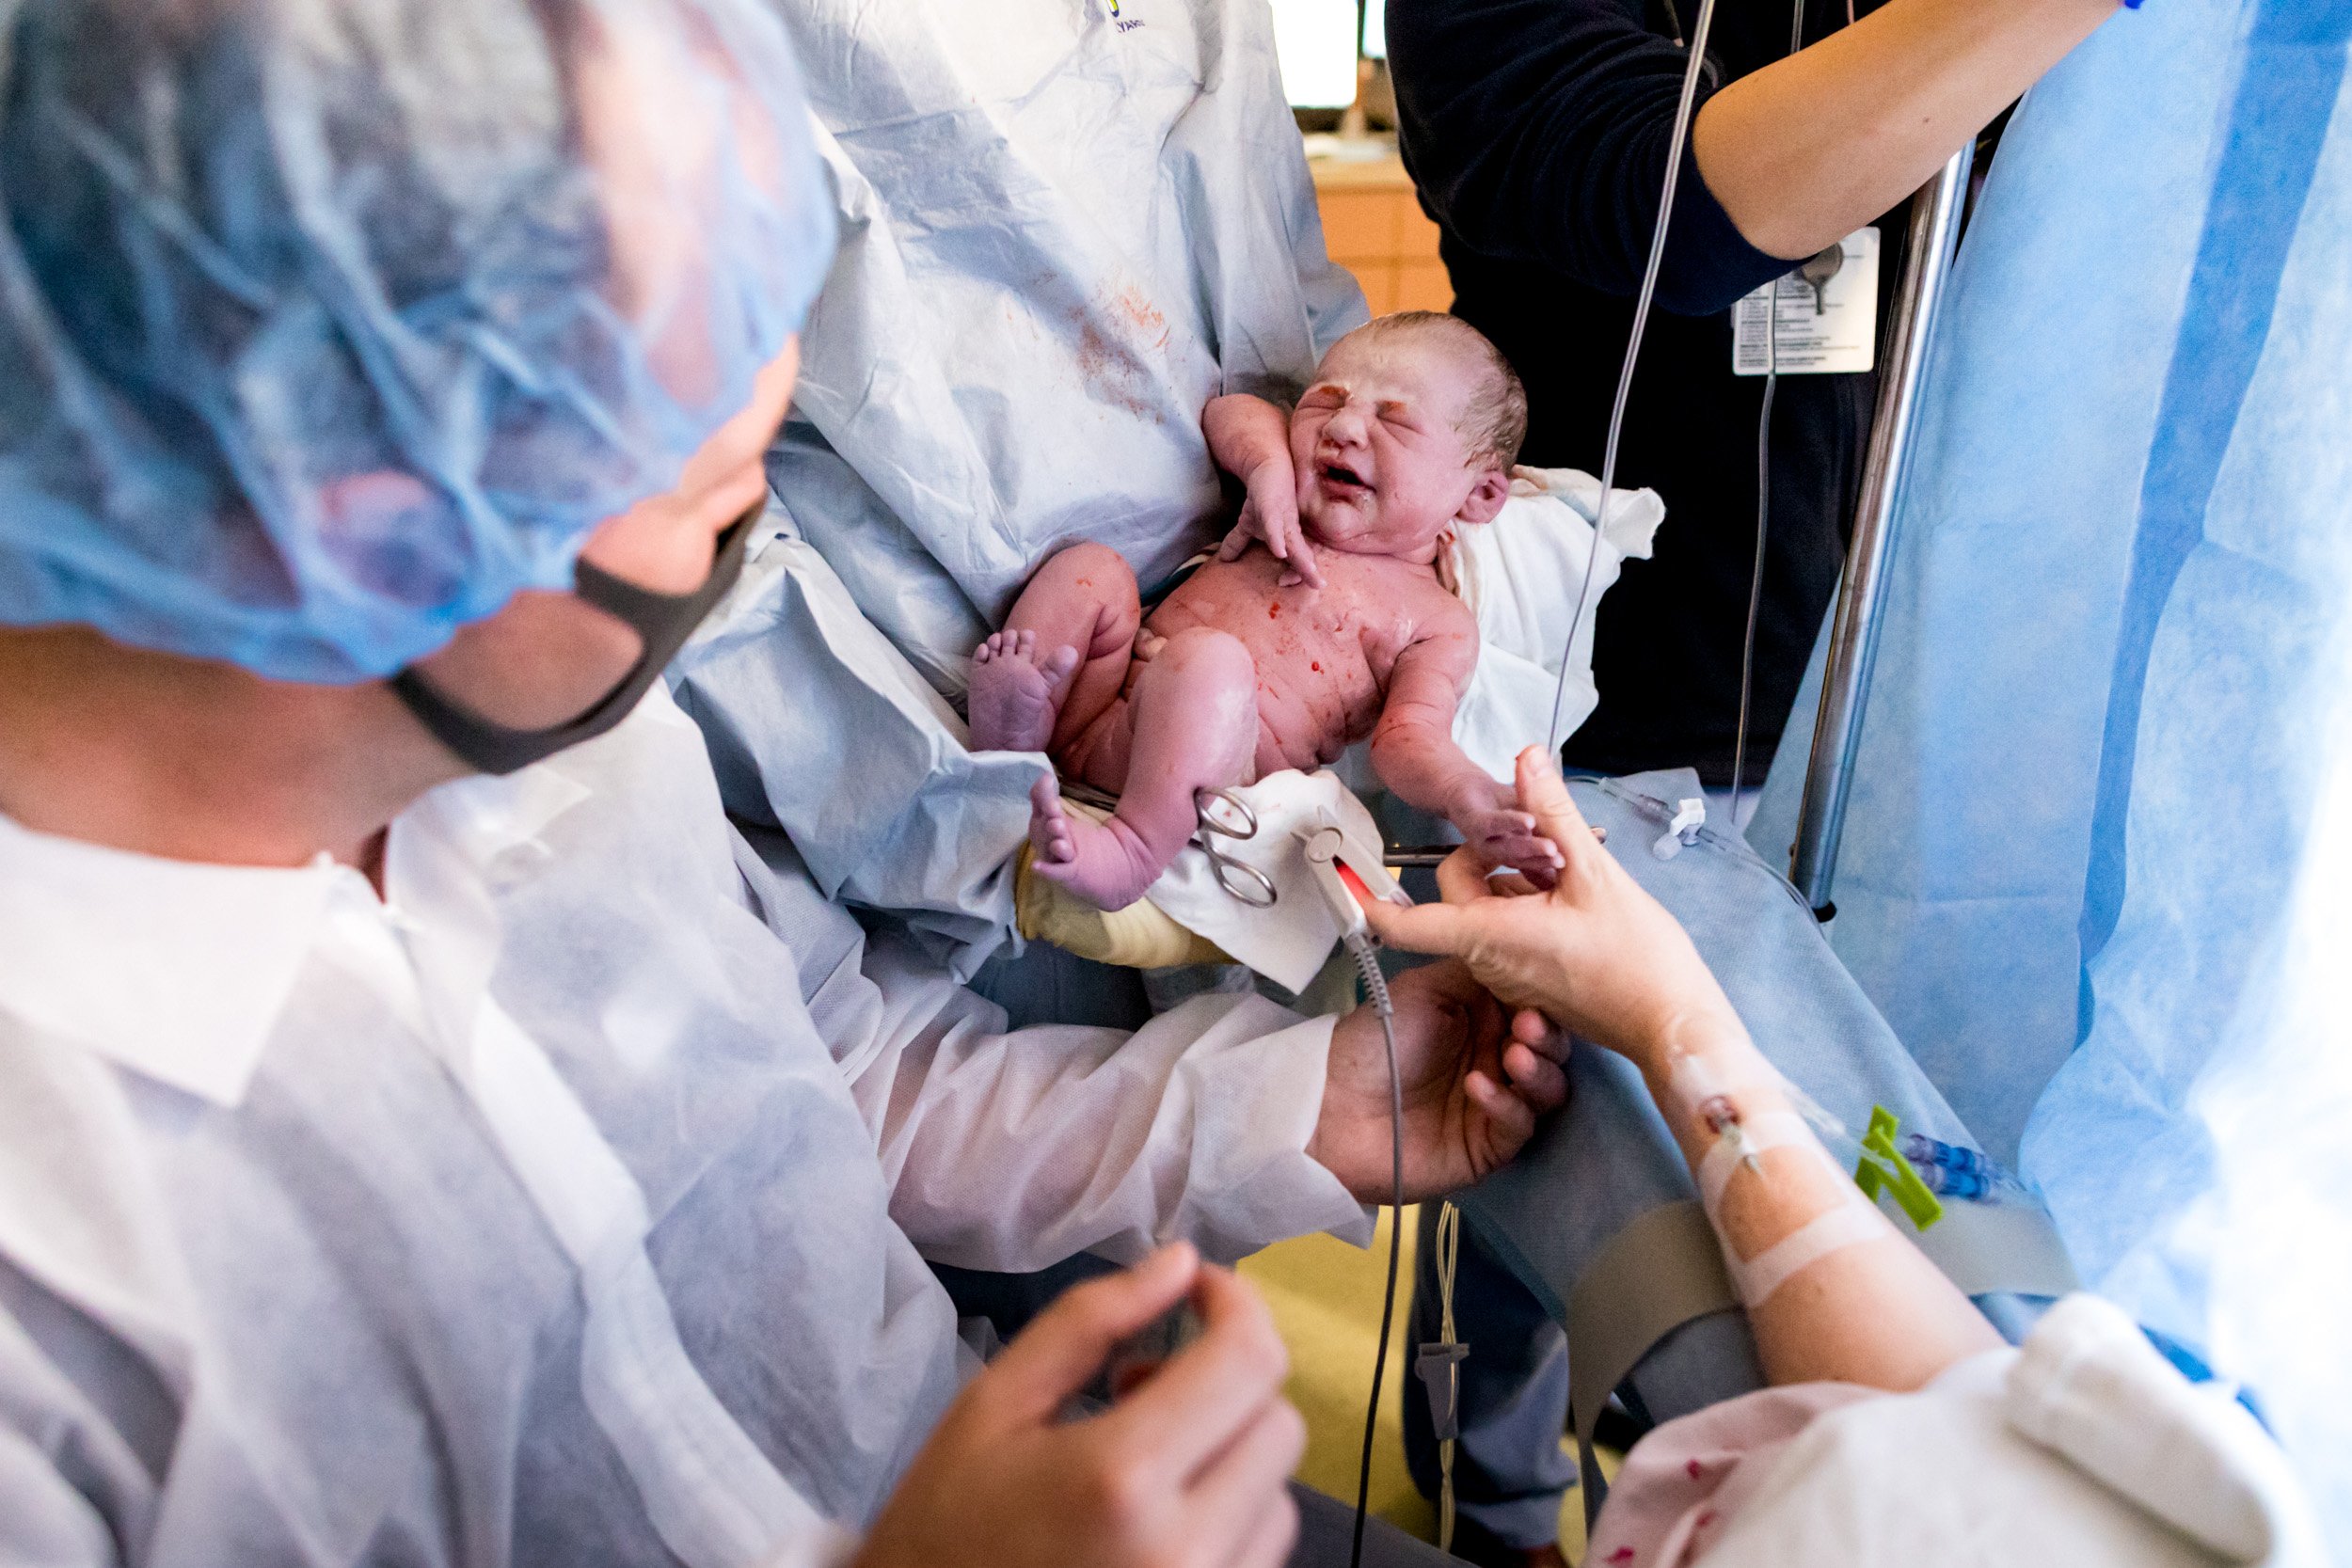 mom and dad touching their baby for the first time after birth by cesarean